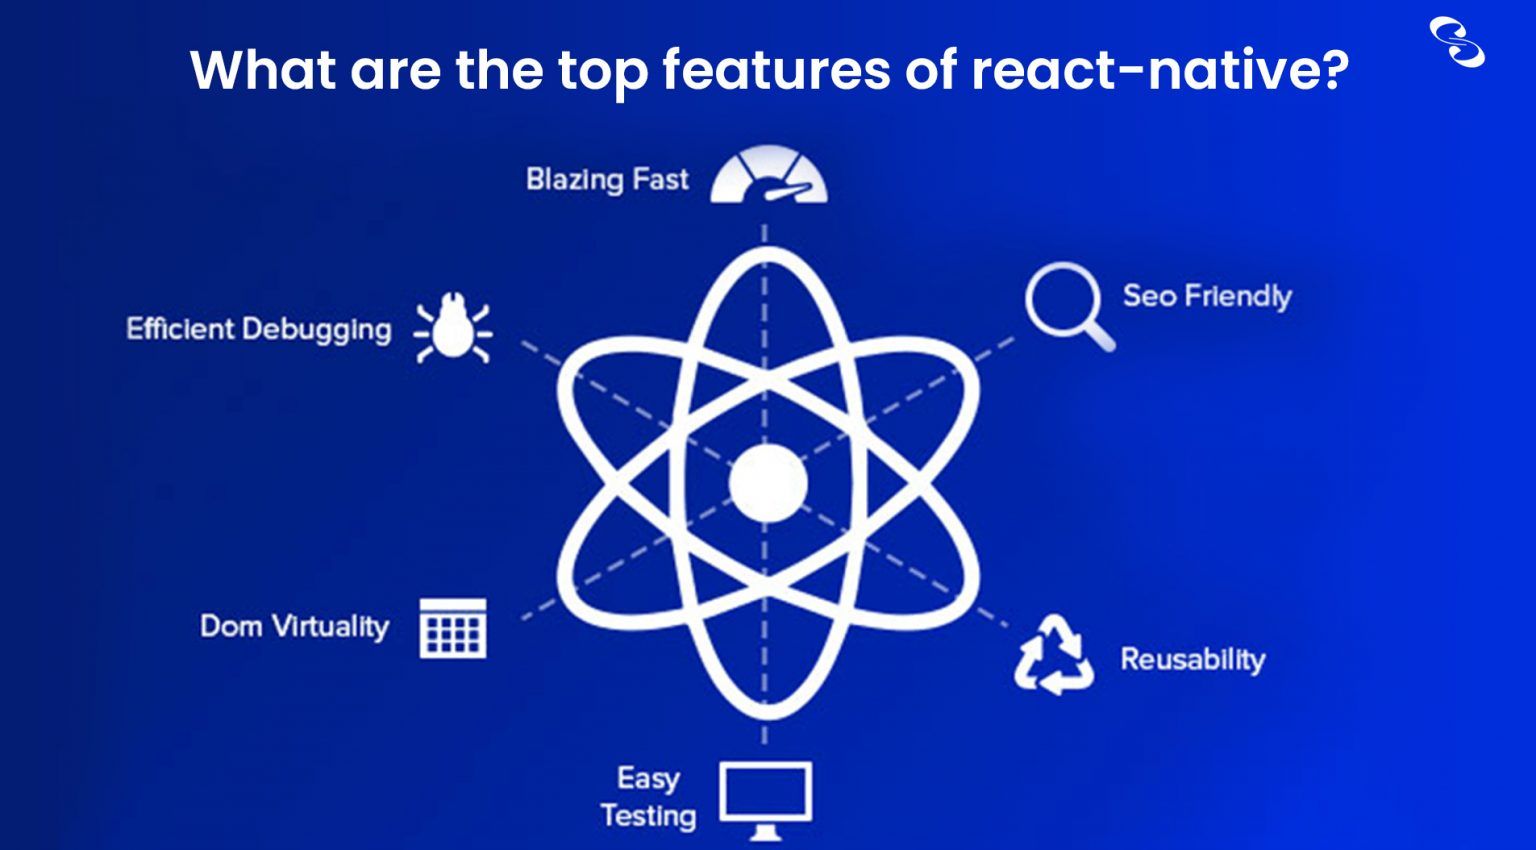 Why To Use React-Native For App Development In 2022?